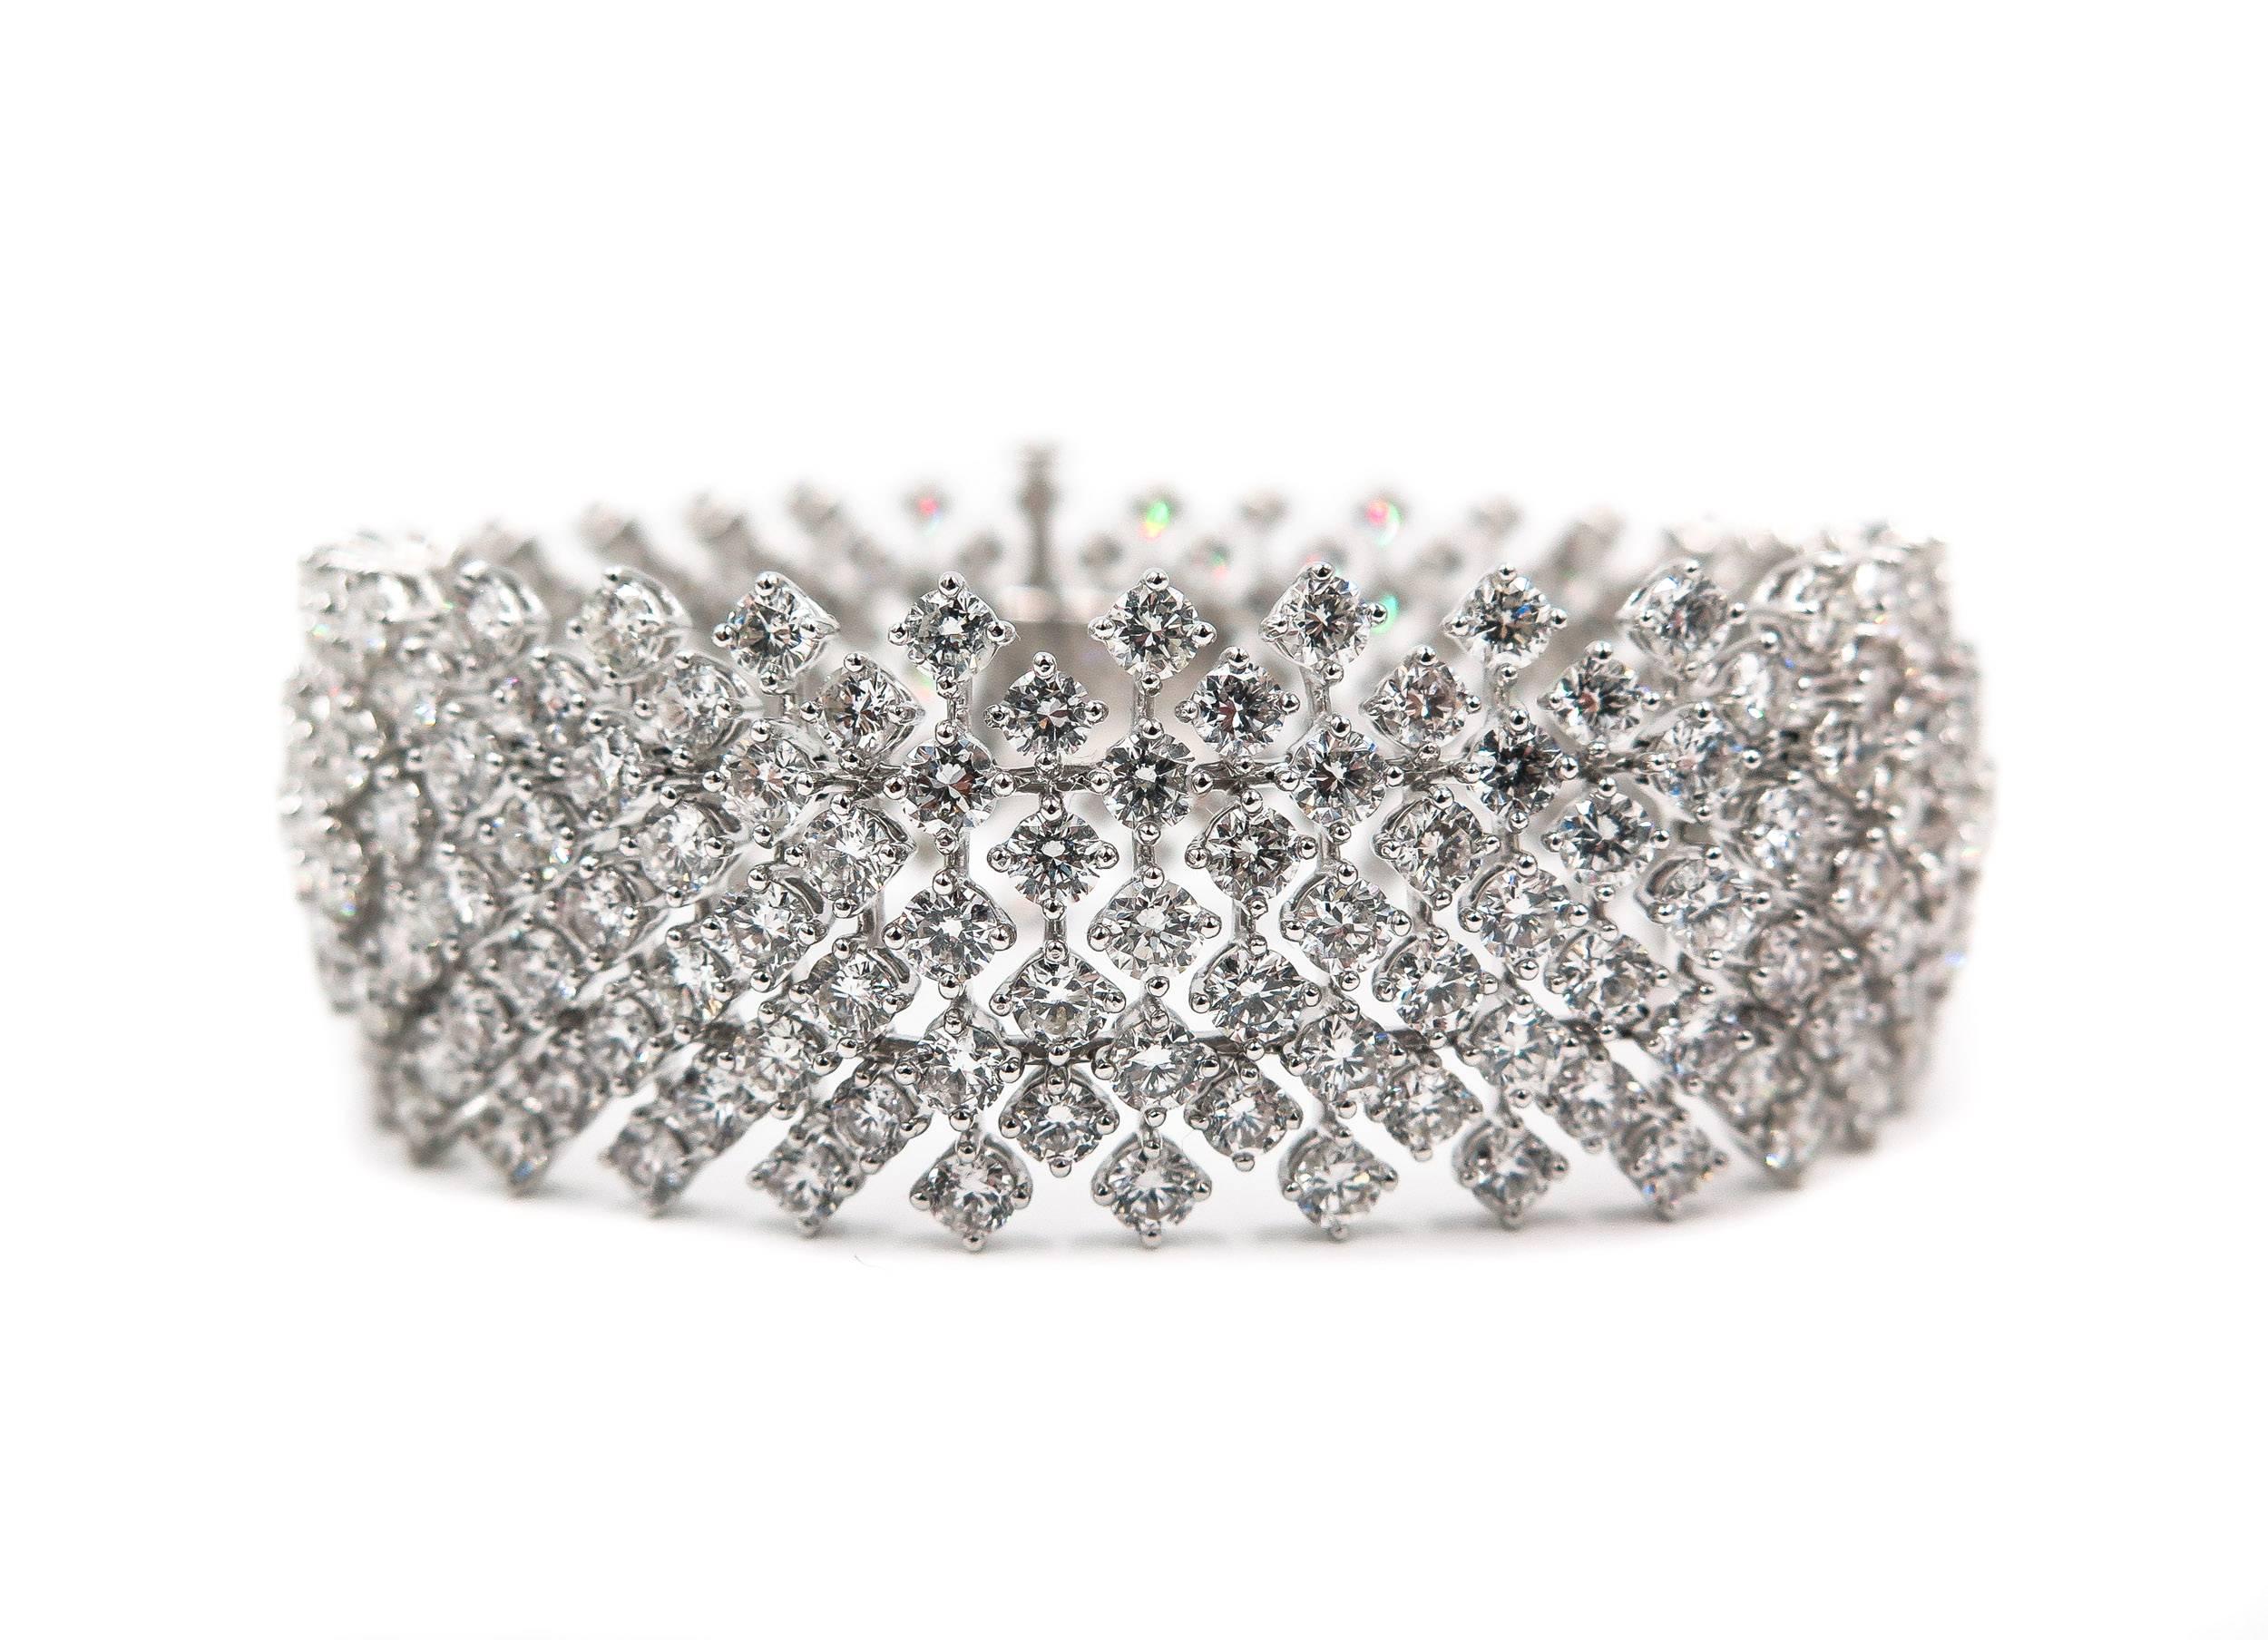 This Magnificent Bracelet features an intricate pattern of 9 rows of round brilliant cut Diamonds crafted in 18k White Gold.  
The soft and flexible design of the diamond bracelet drapes on the wrist with fluidity. 
The total diamond weight is 25.80